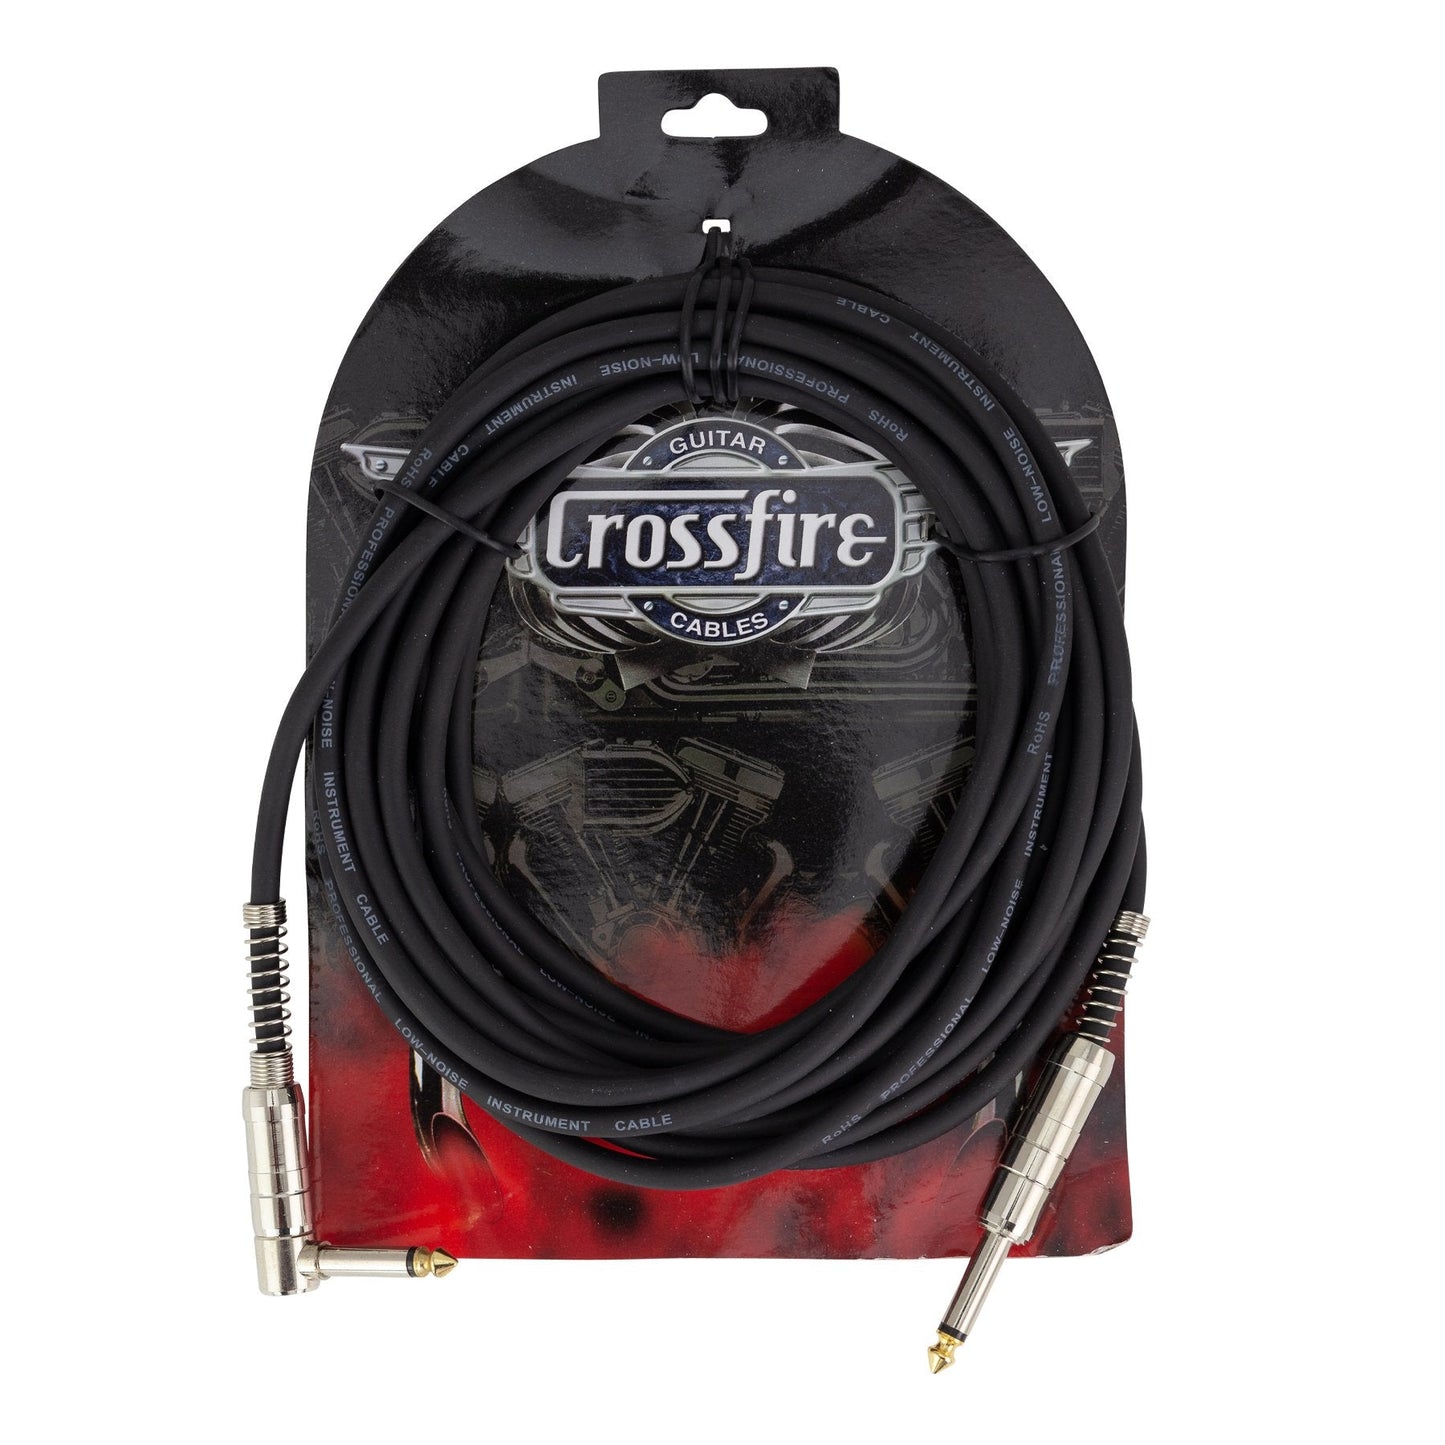 Crosssfire 20' / 6 Metre Instrument Cable with Straight/Angled Metal Jacks